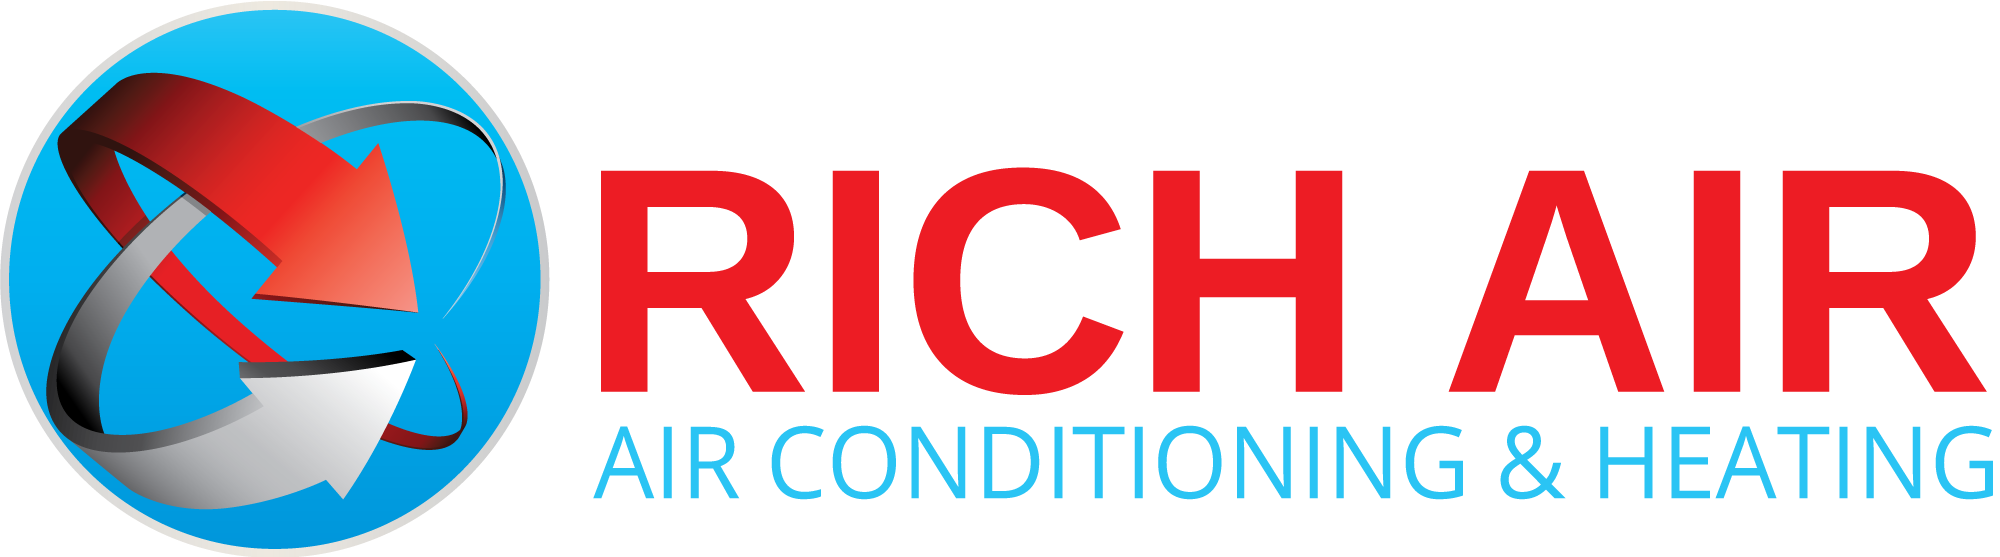 Rich Air Conditioning